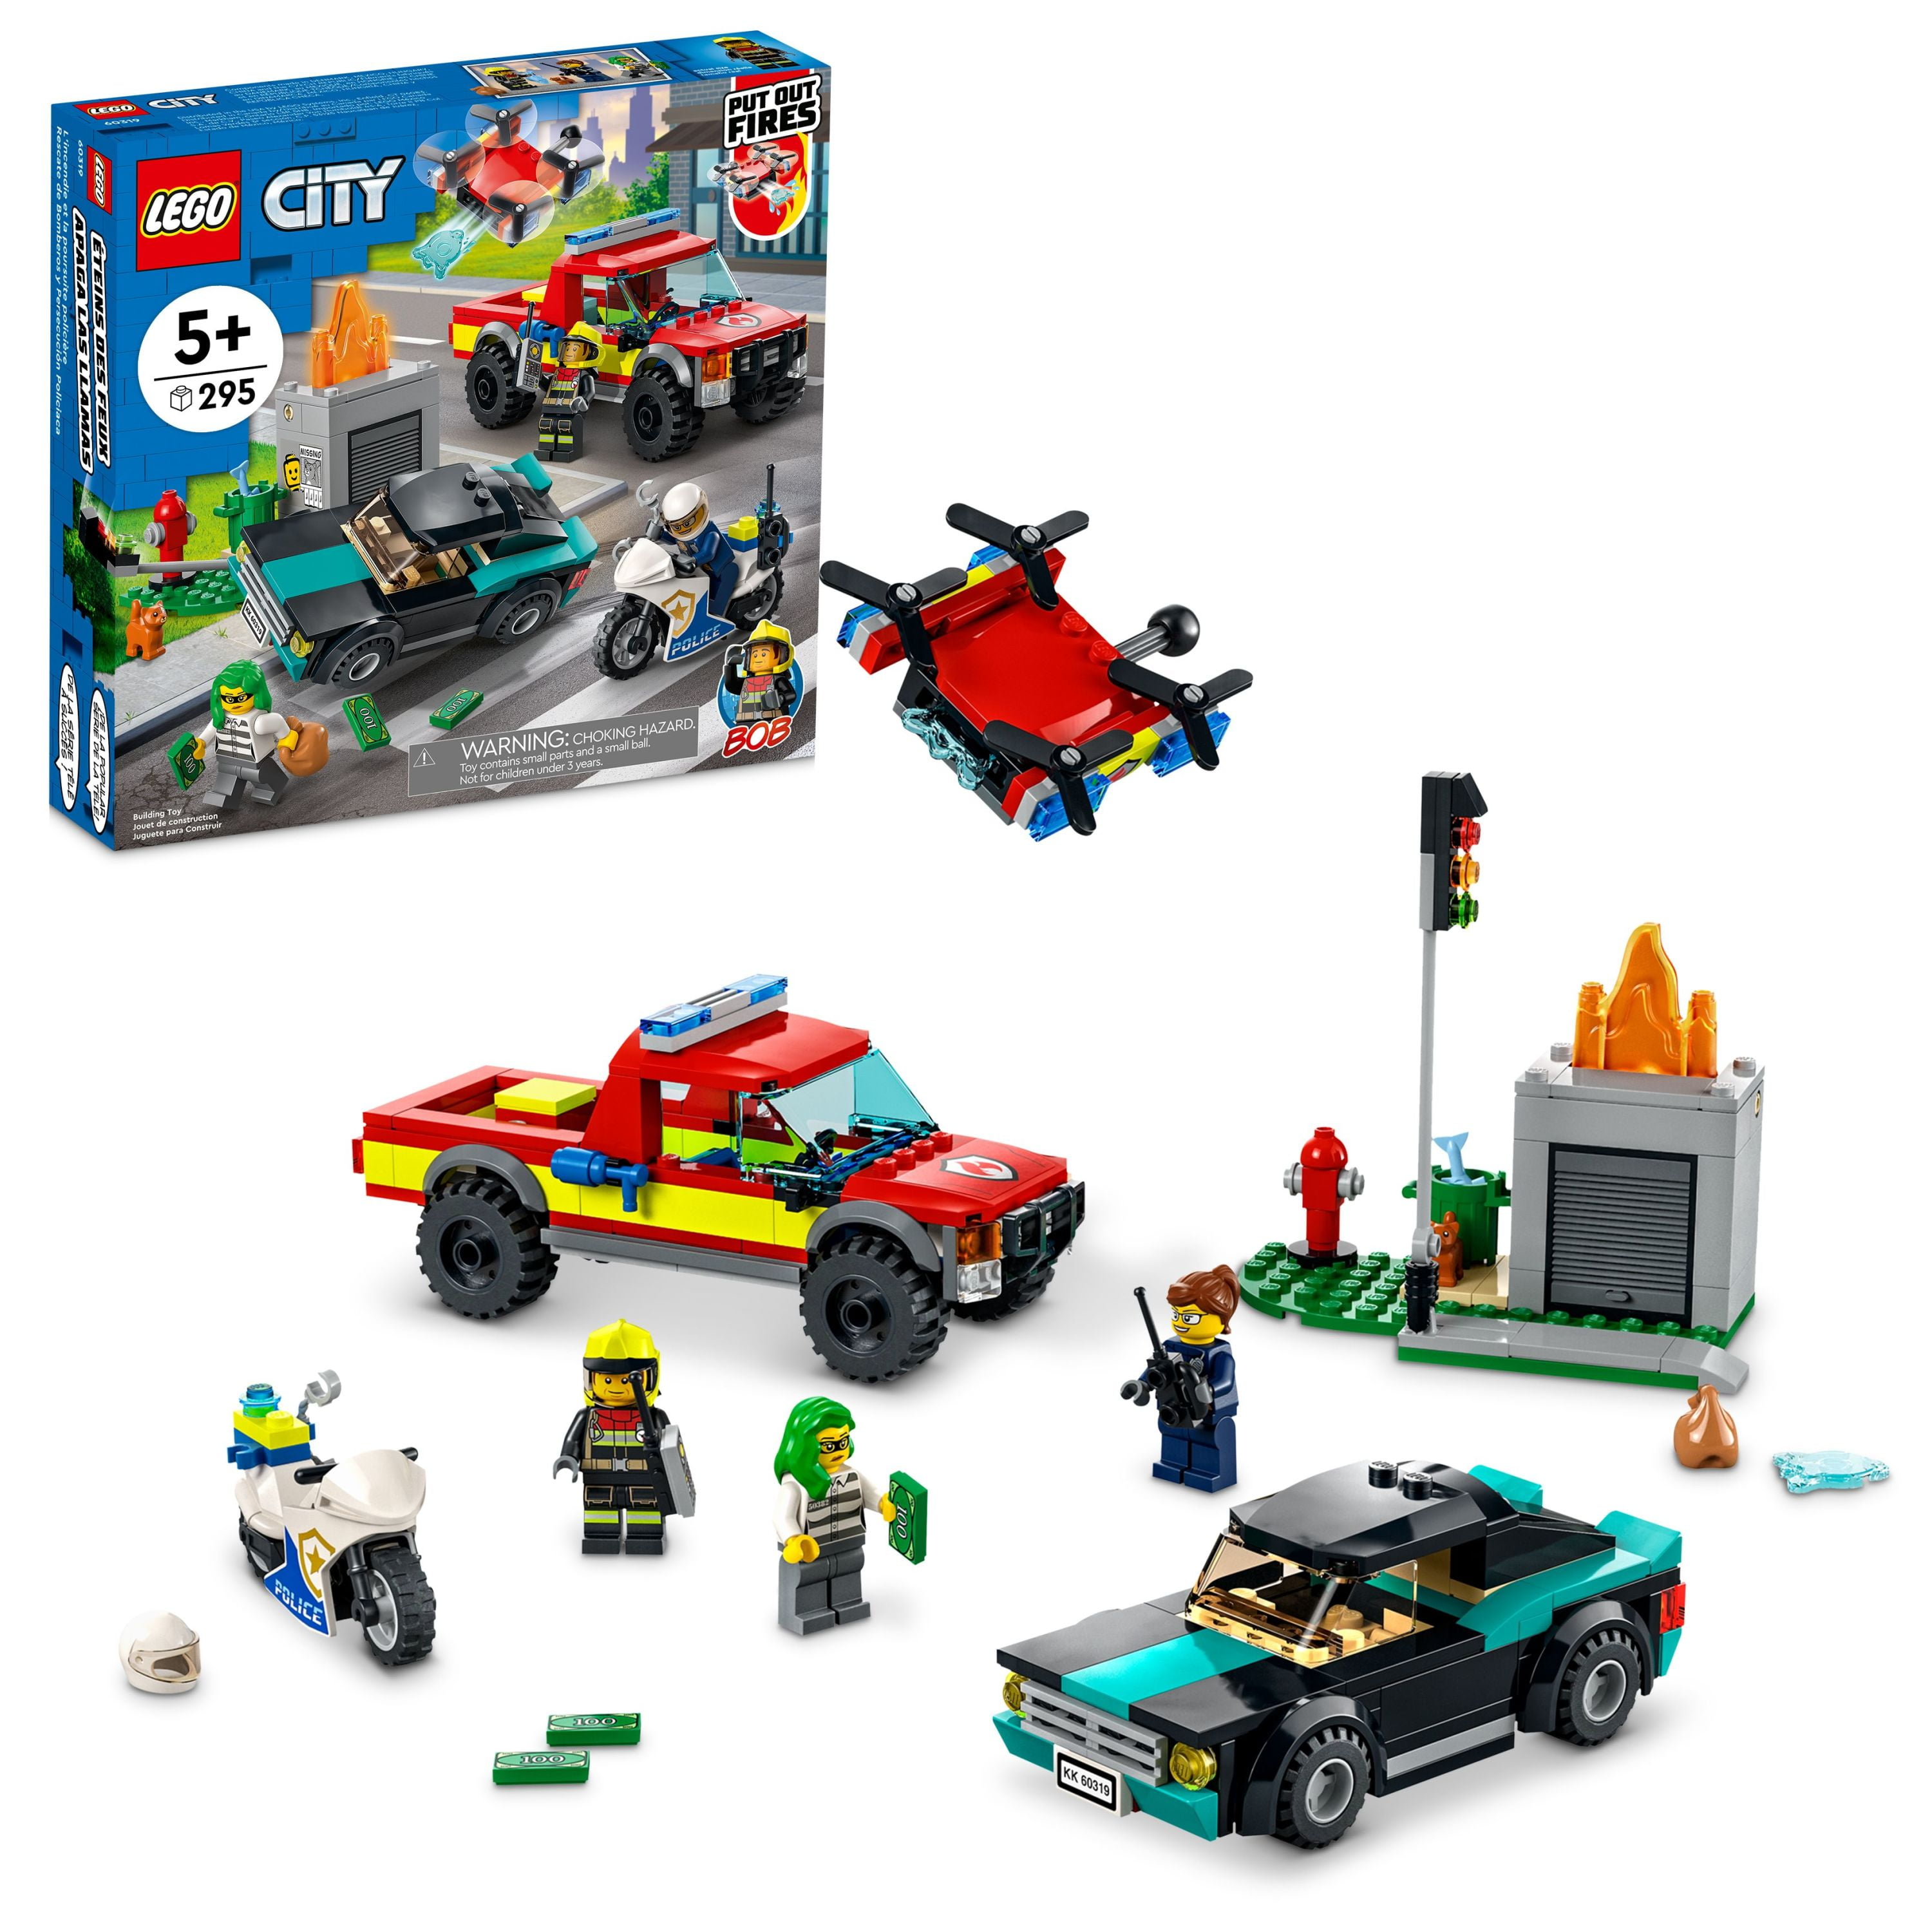 LEGO City Fire Rescue & Police Chase 60319 Building Kit for Ages 5+; With a Fire Pickup, Police Motorbike, Crooks Vehicle, Toy Traffic Light andFlames, Plus 3 Minifigures (295 Pieces)